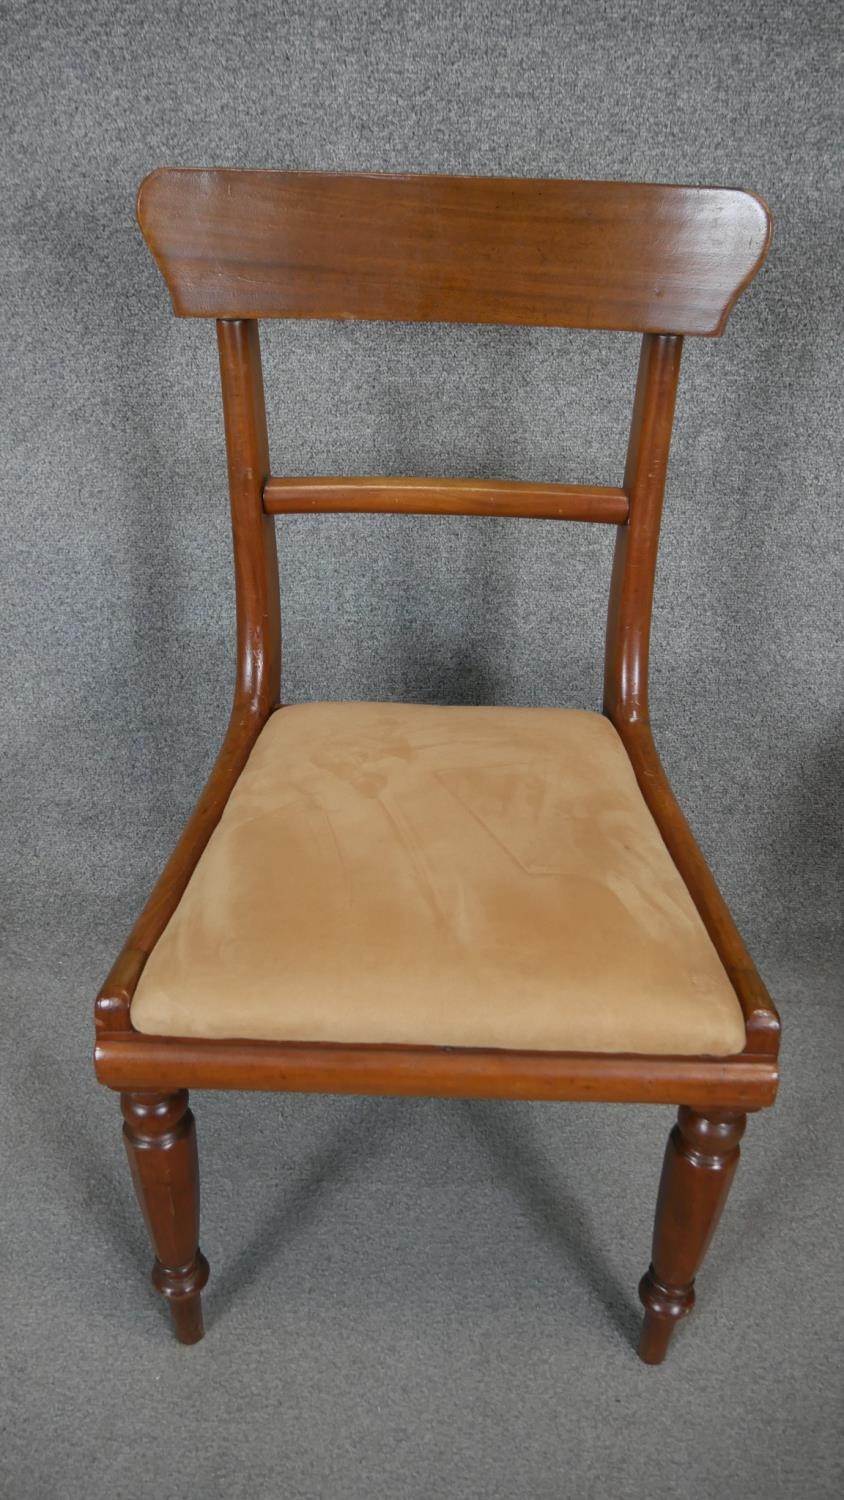 A 19th century mahogany bar back dining chair along with a similar chair. - Image 2 of 5